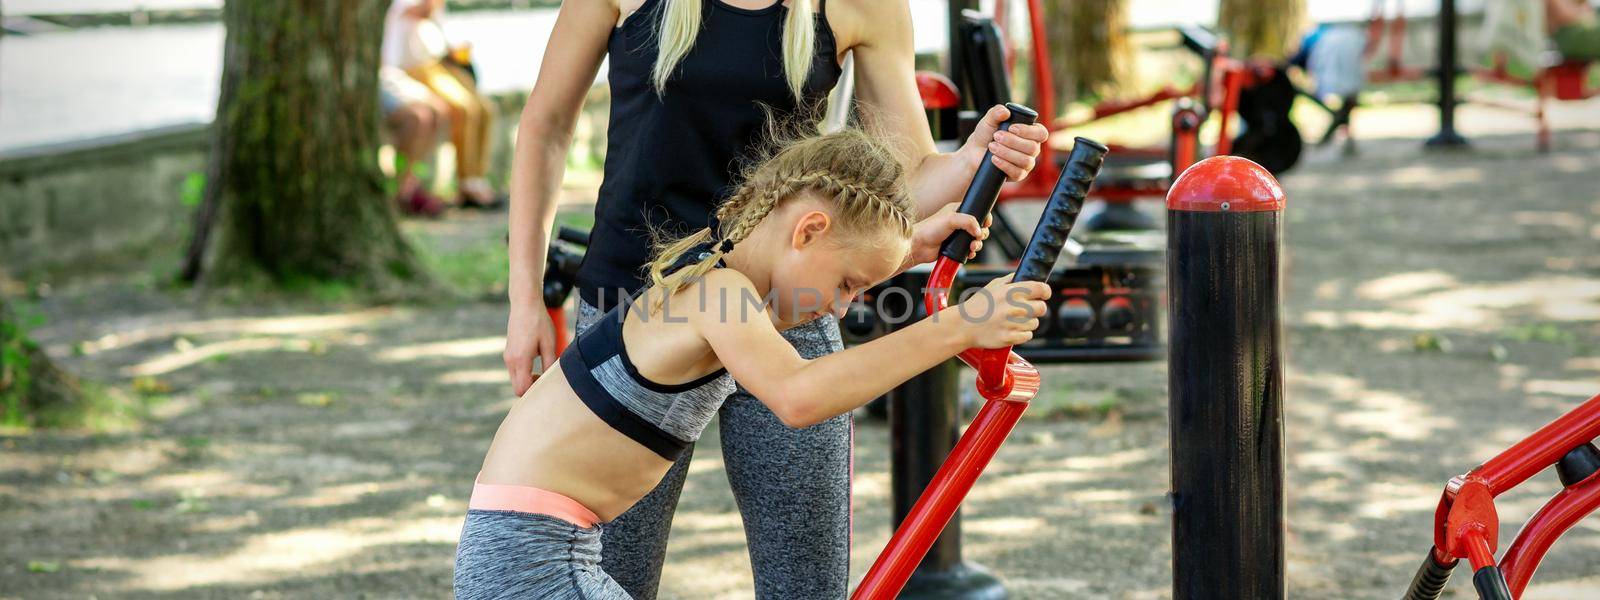 Little girl does exercises on simulator under supervision of young woman coach in the park